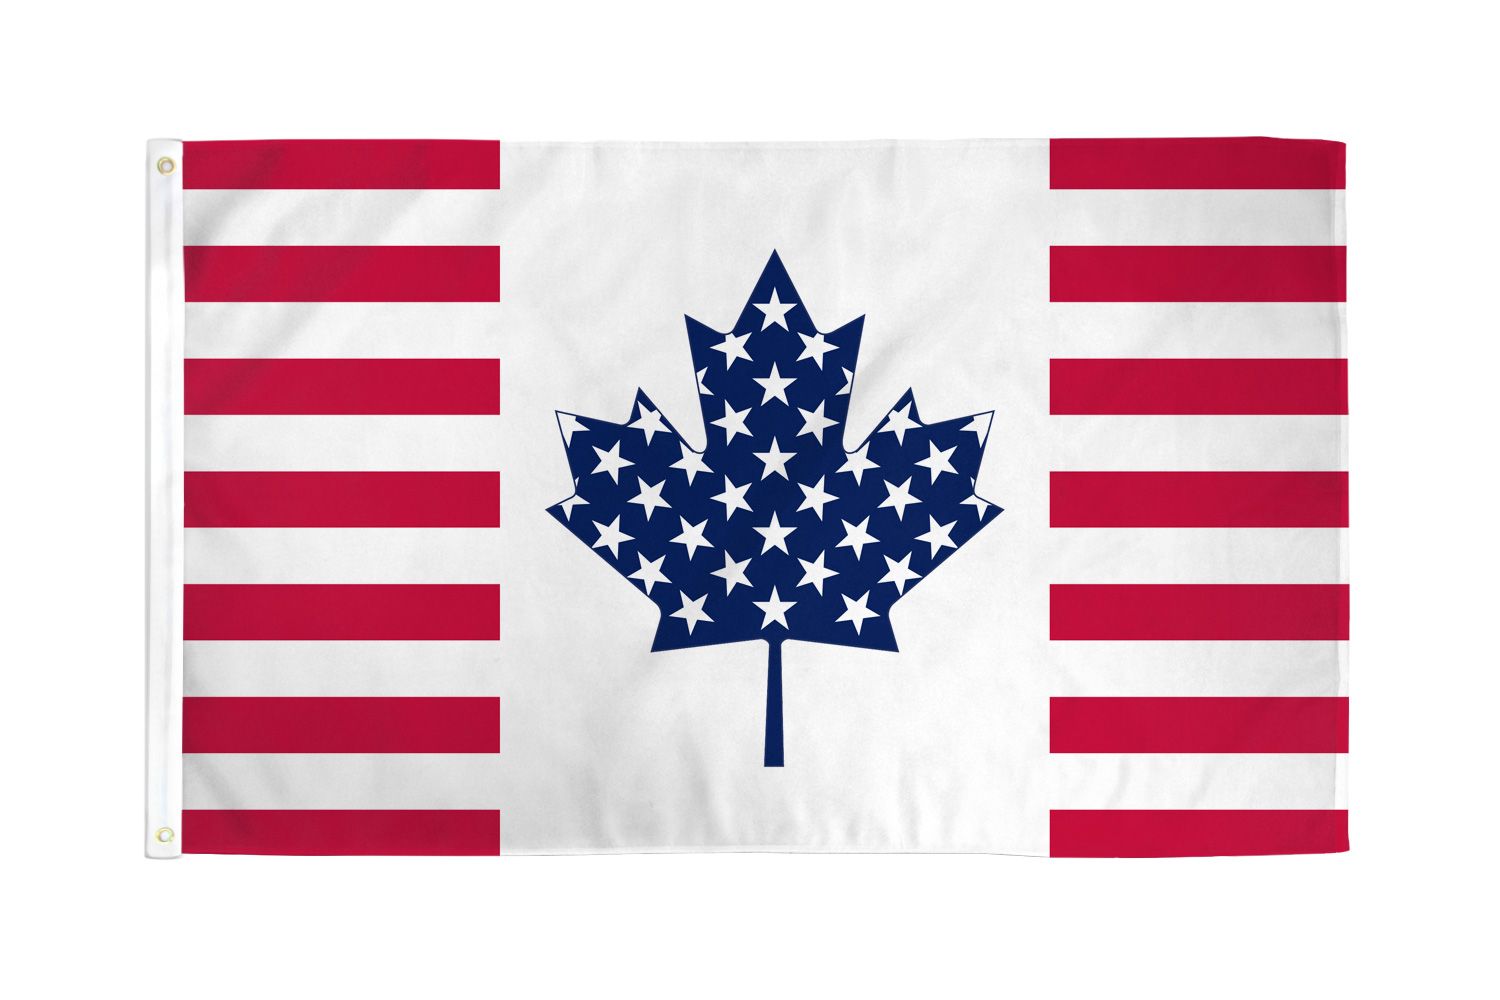 NEW BIG 2x3 ft QUEBEC CANADA CANADIAN FLAG better quality usa seller 